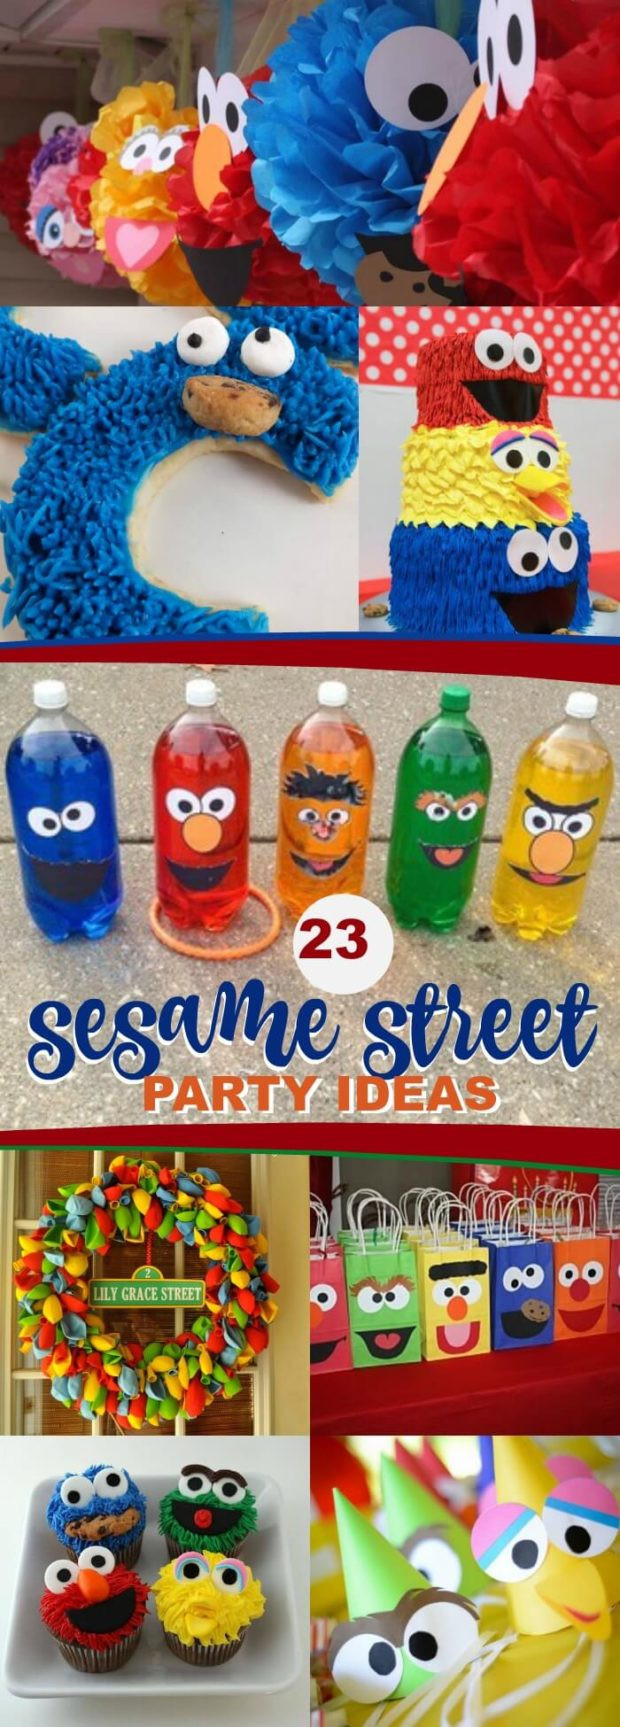 Sesame Street Birthday Party Decorations
 23 Sensational Sesame Street Party Ideas Spaceships and